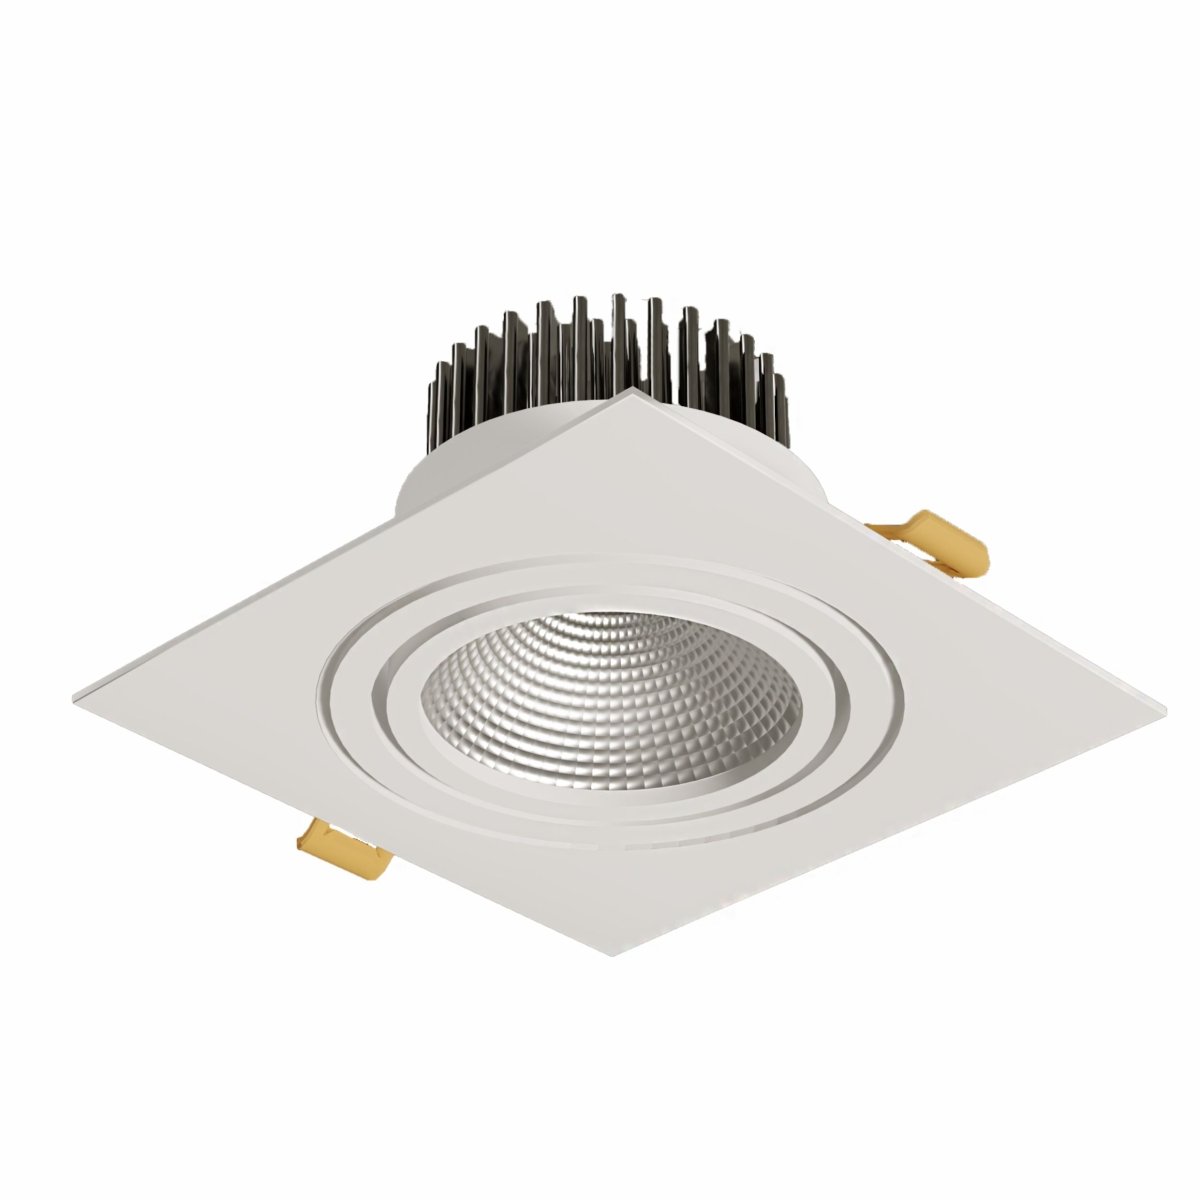 Main image of LED Recessed Downlight 5W Cool White 4000K White IP20